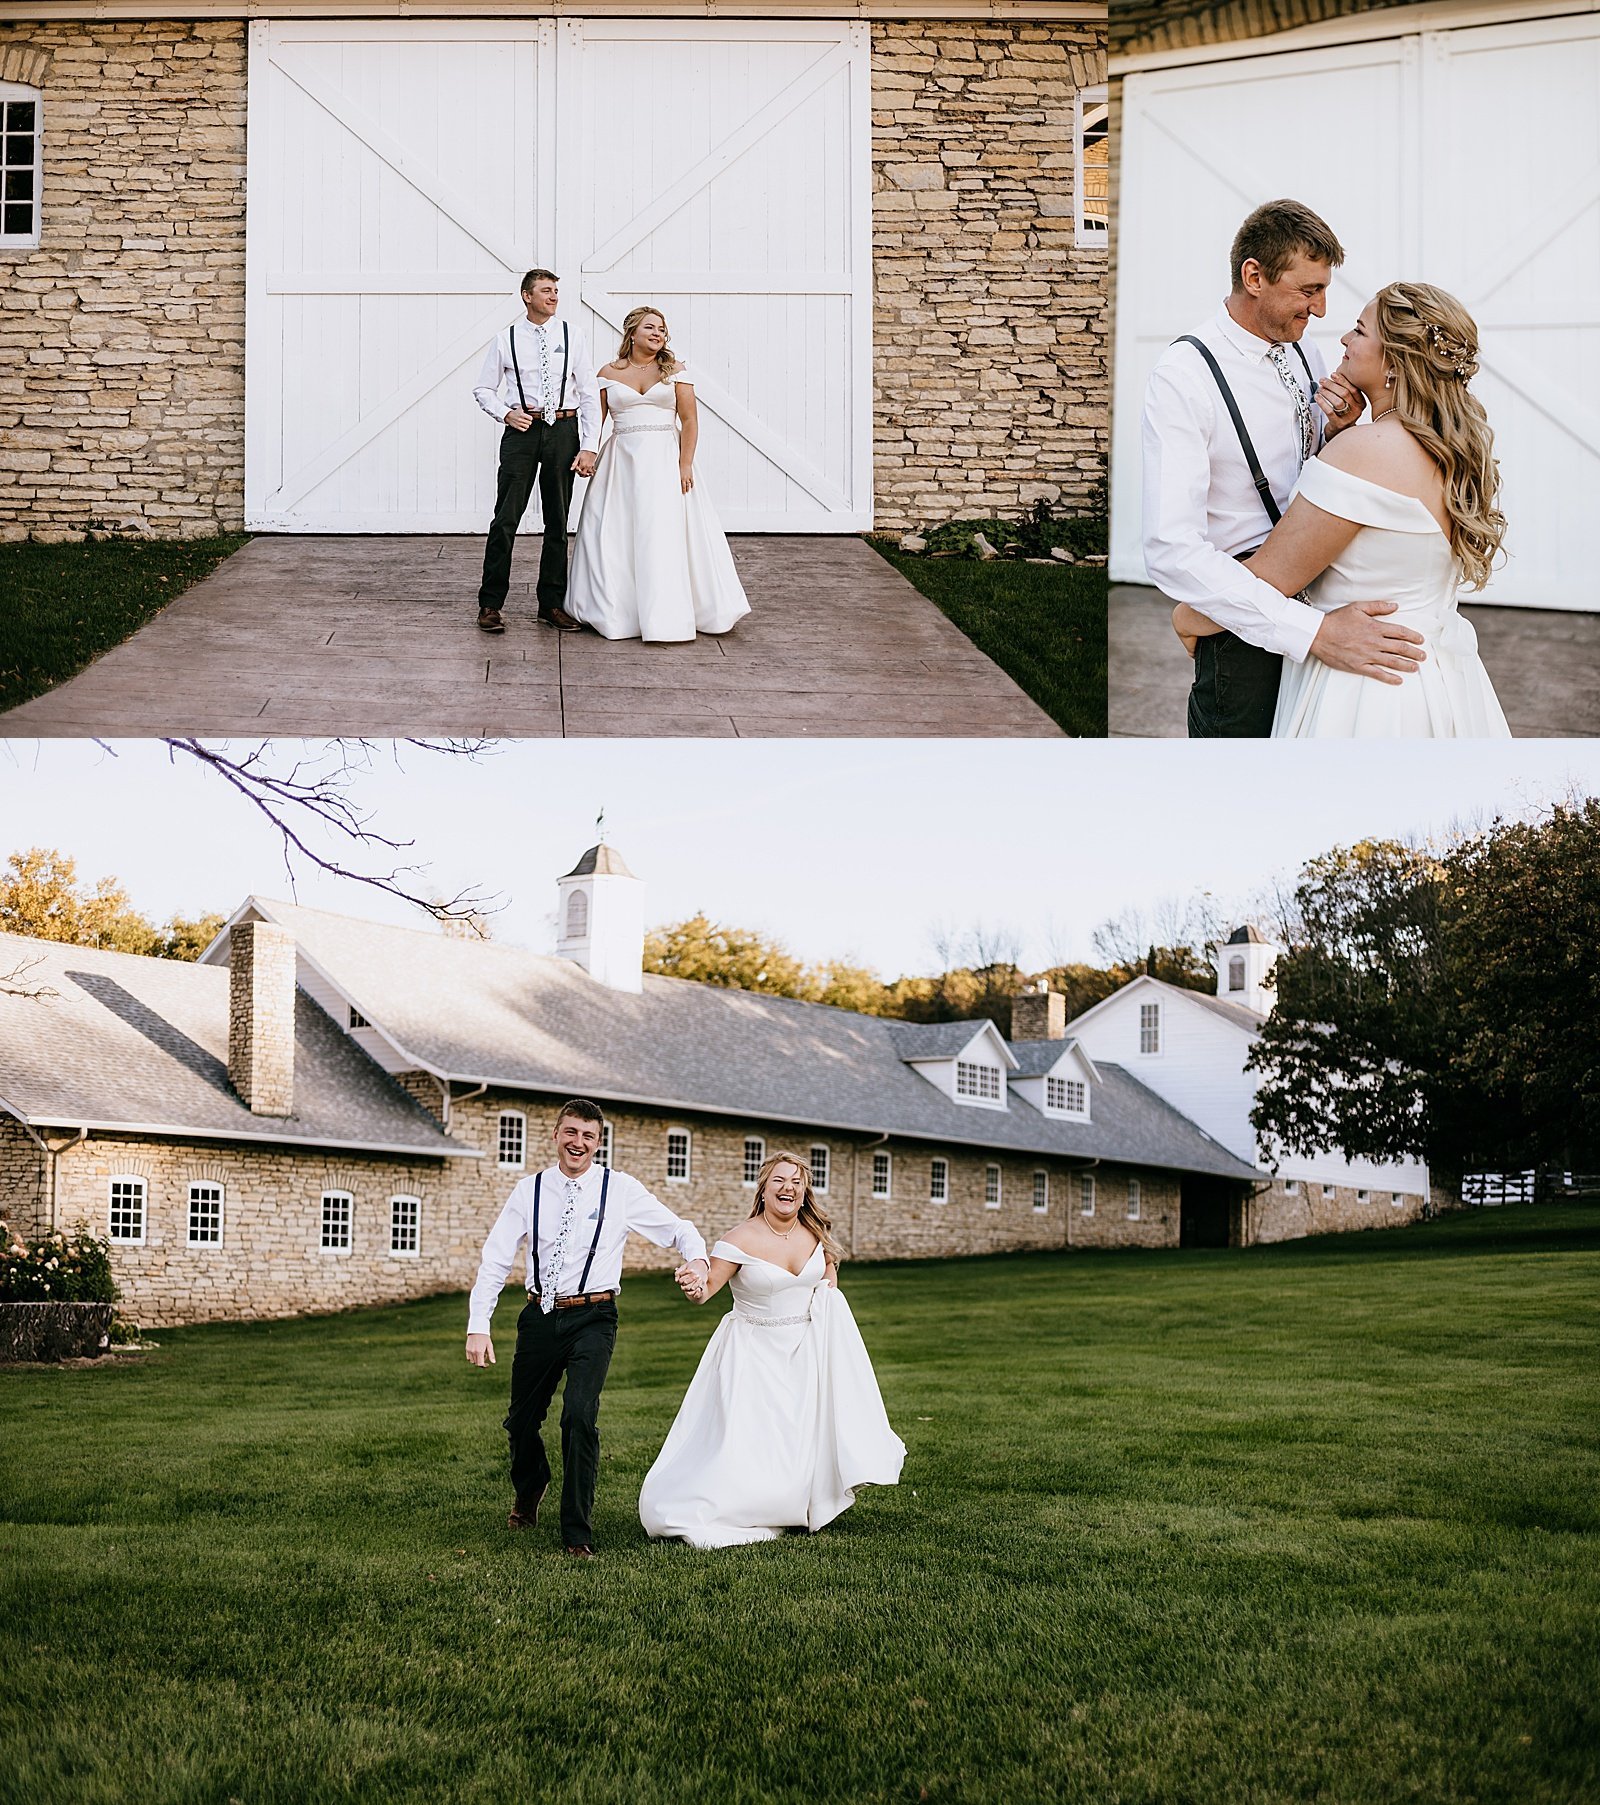  Bride and groom dancing in front of their wedding venue after their first look  